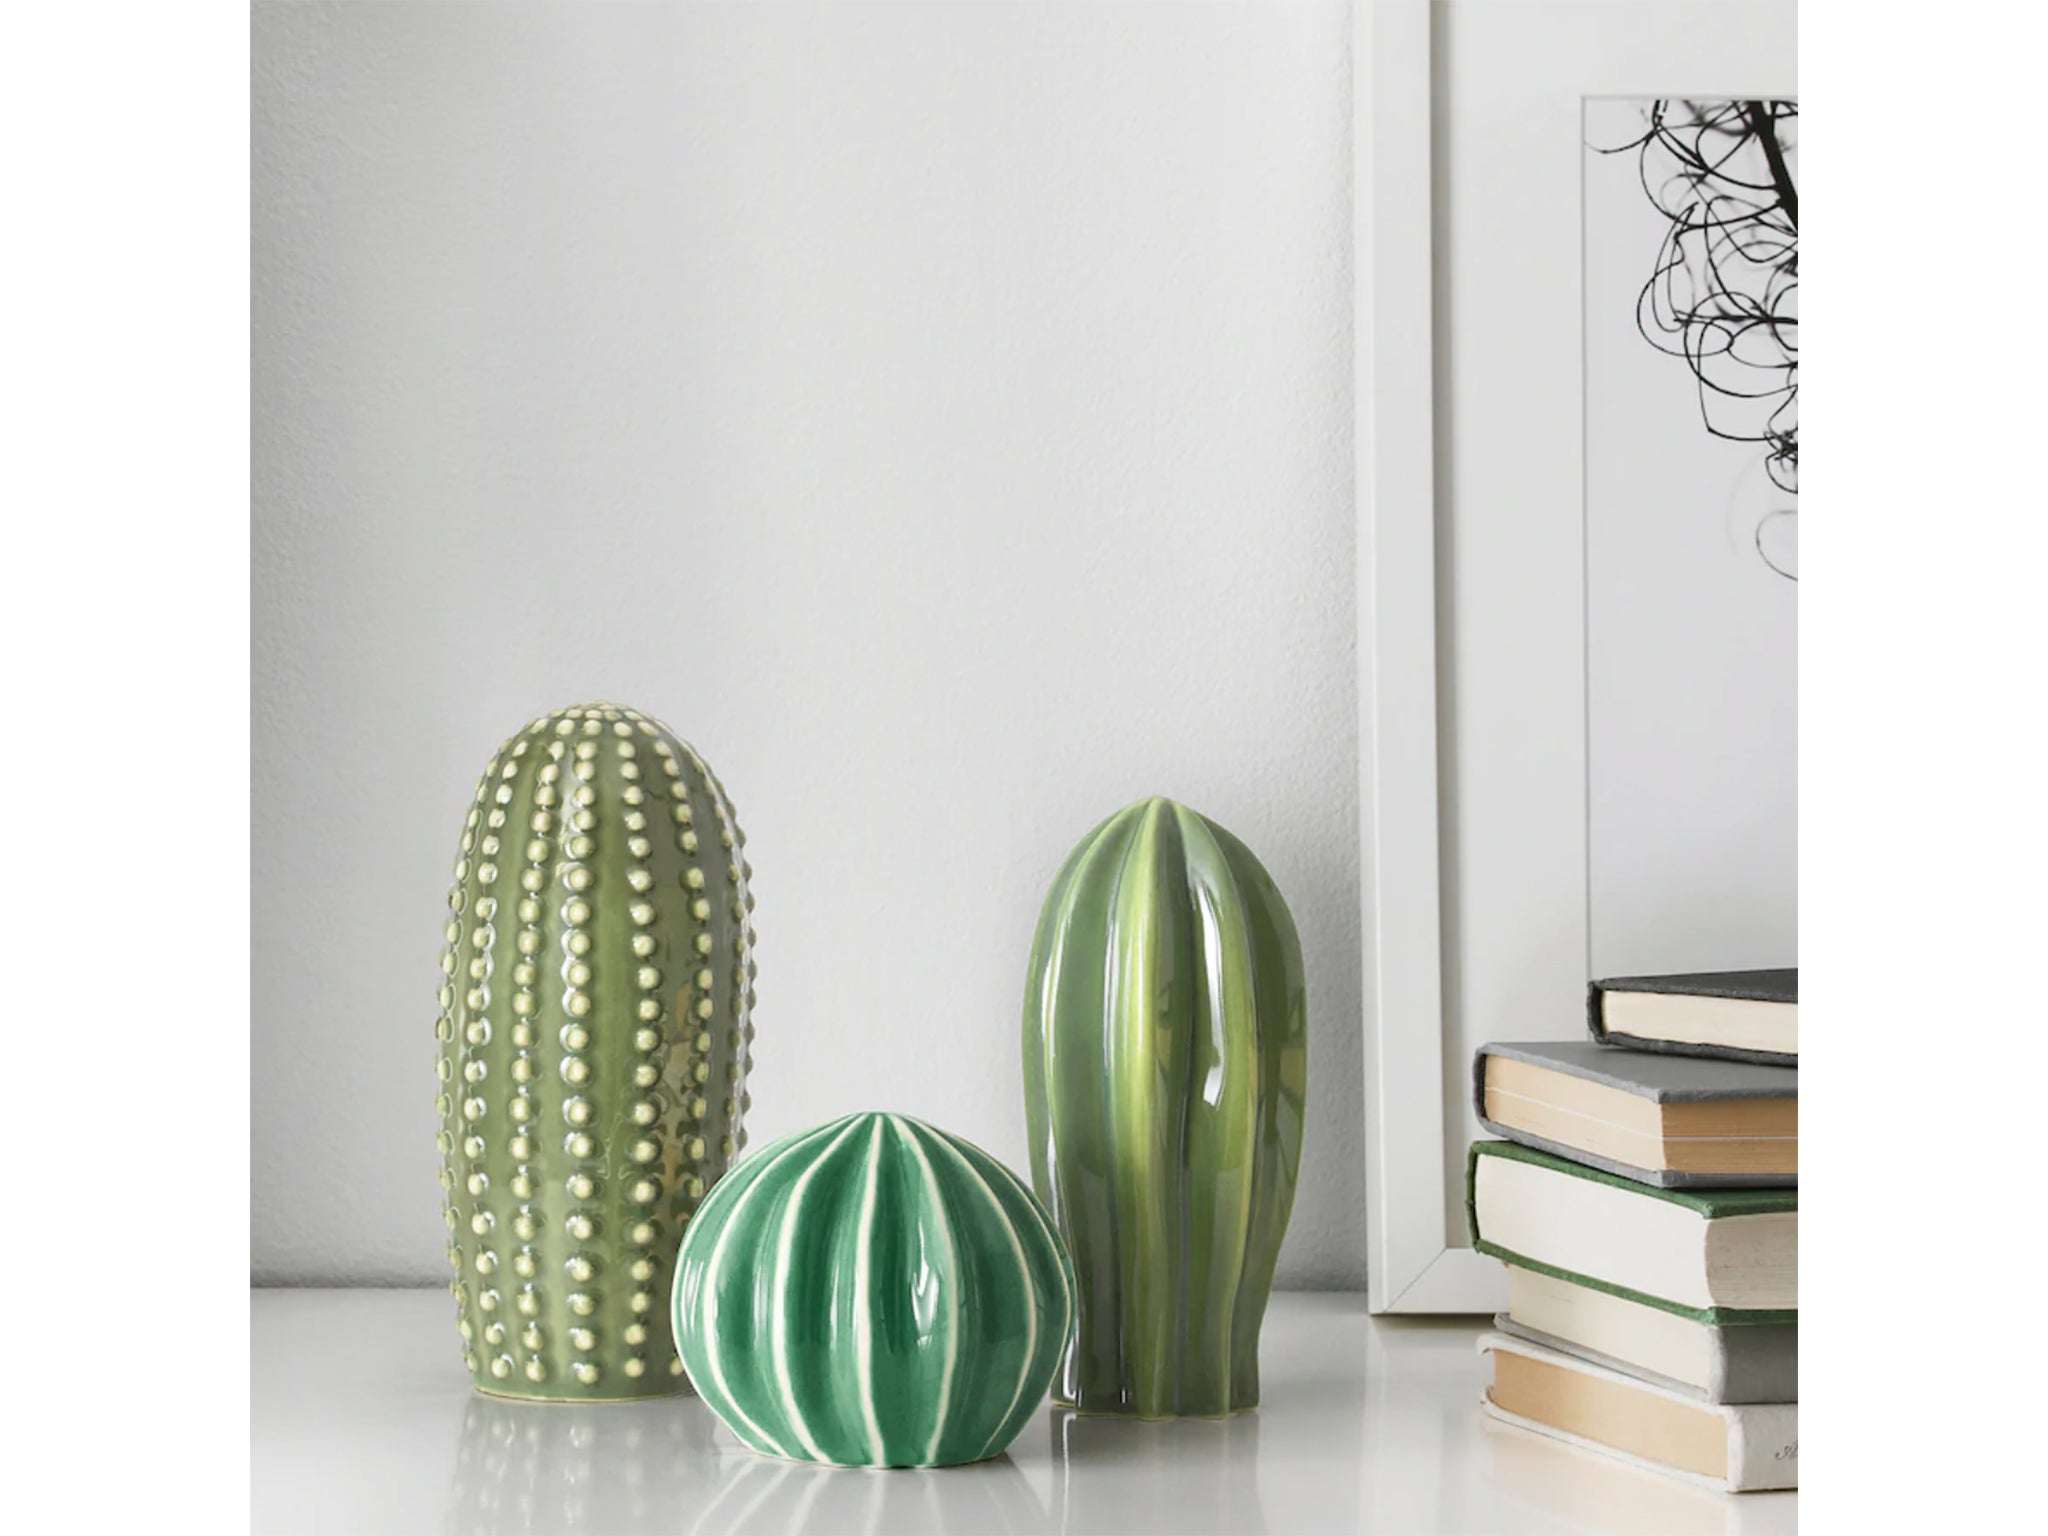 If you don't want to commit to plants, real or faux, in your home, try this ceramic set instead